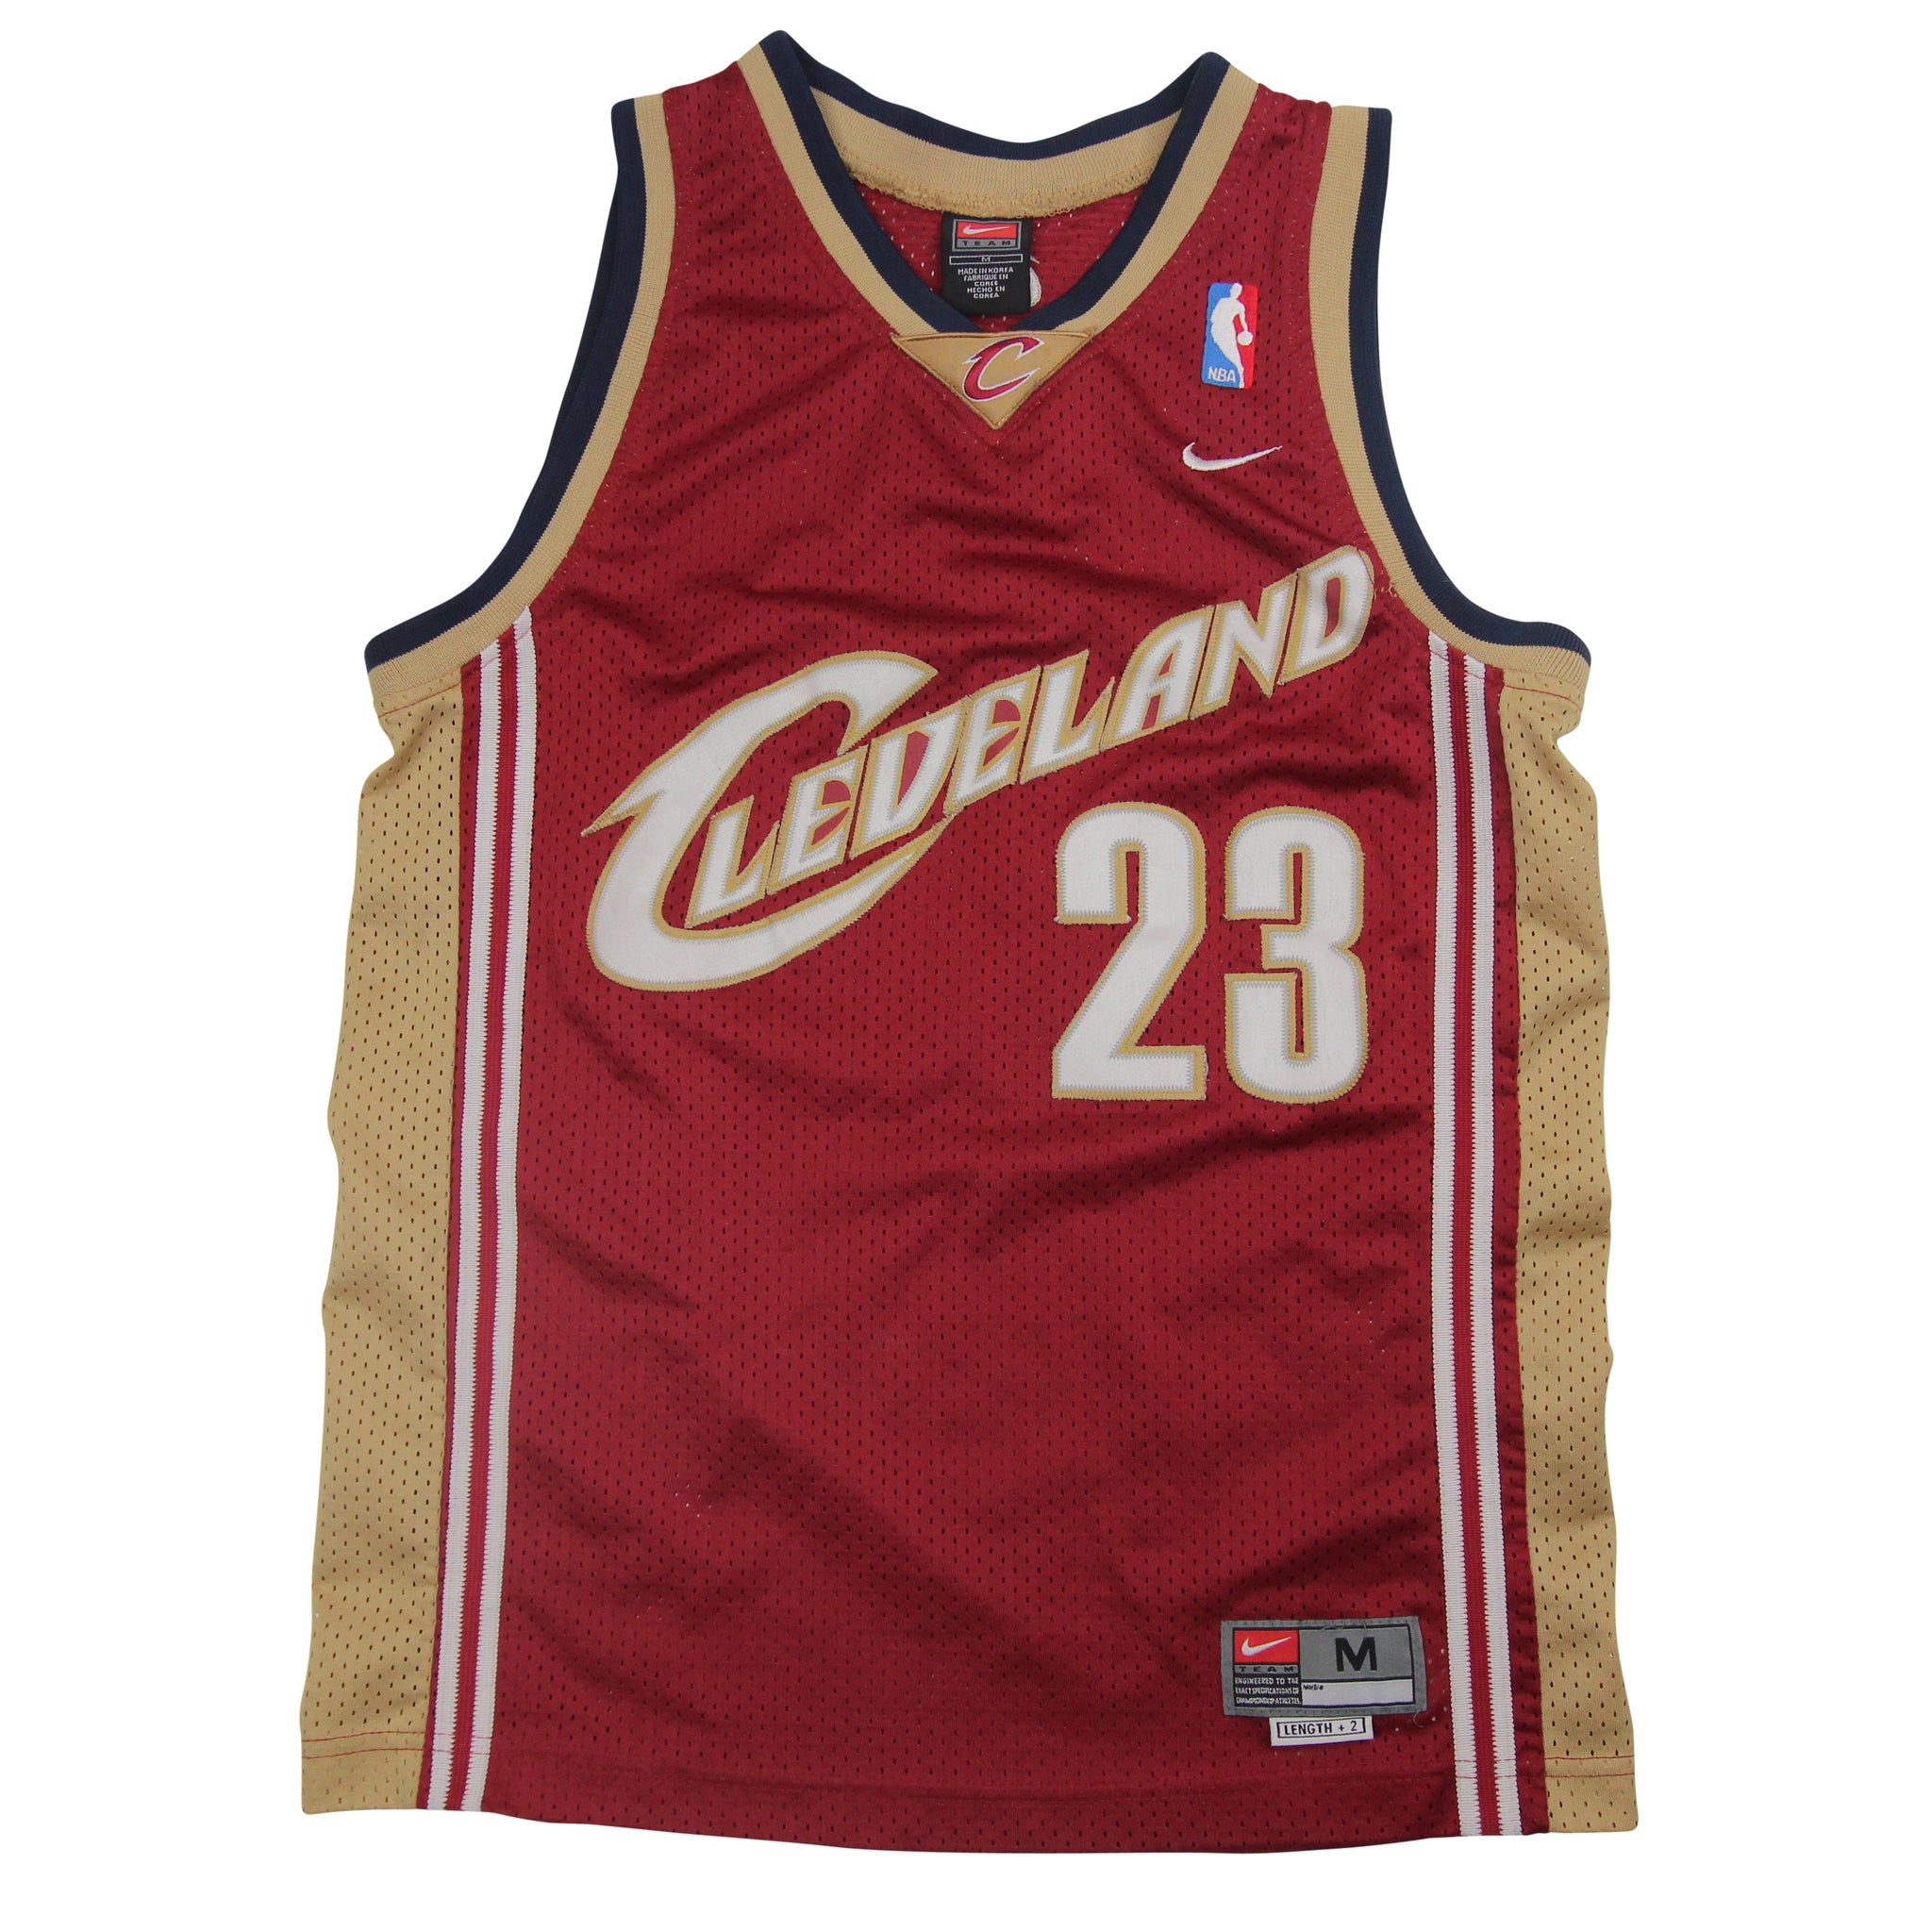 Lebron James (small) STITCHED throwback Cleveland Cavaliers